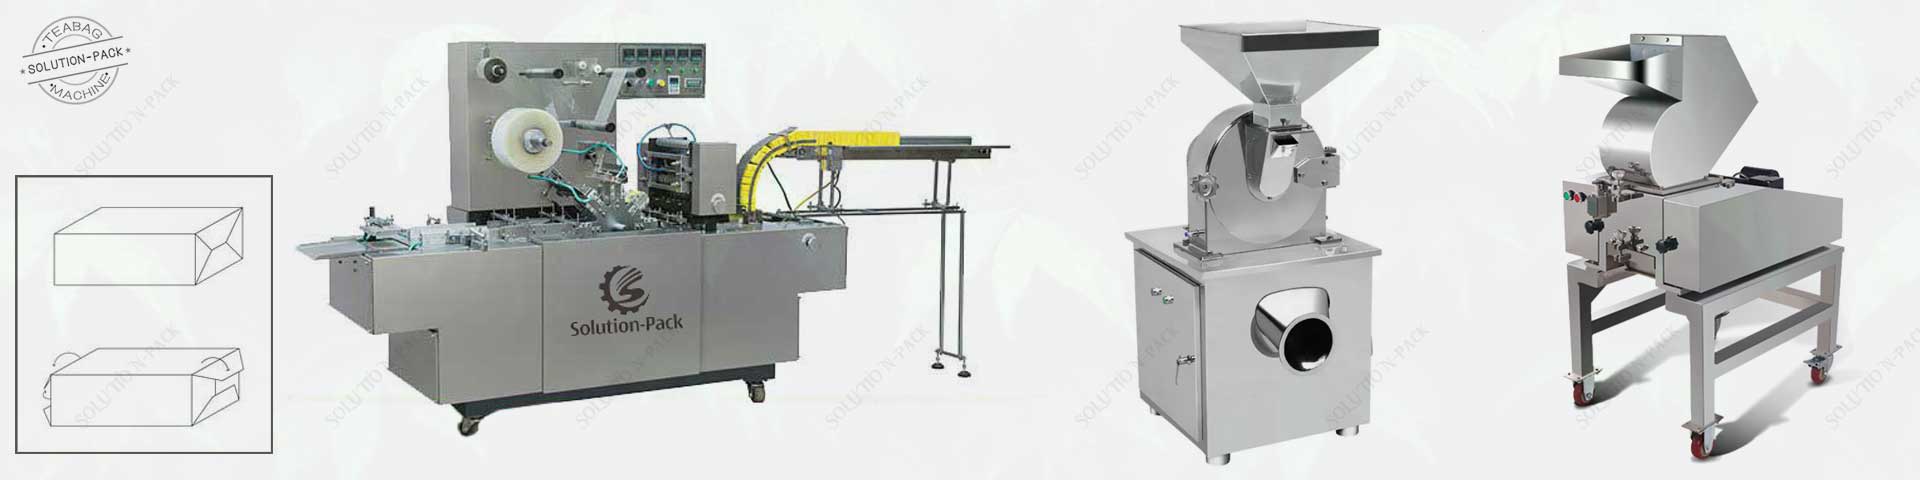 Ancillary Equipment | Cellophane Wrapping Machine | Universal Grinding Machine | Solution-Pack